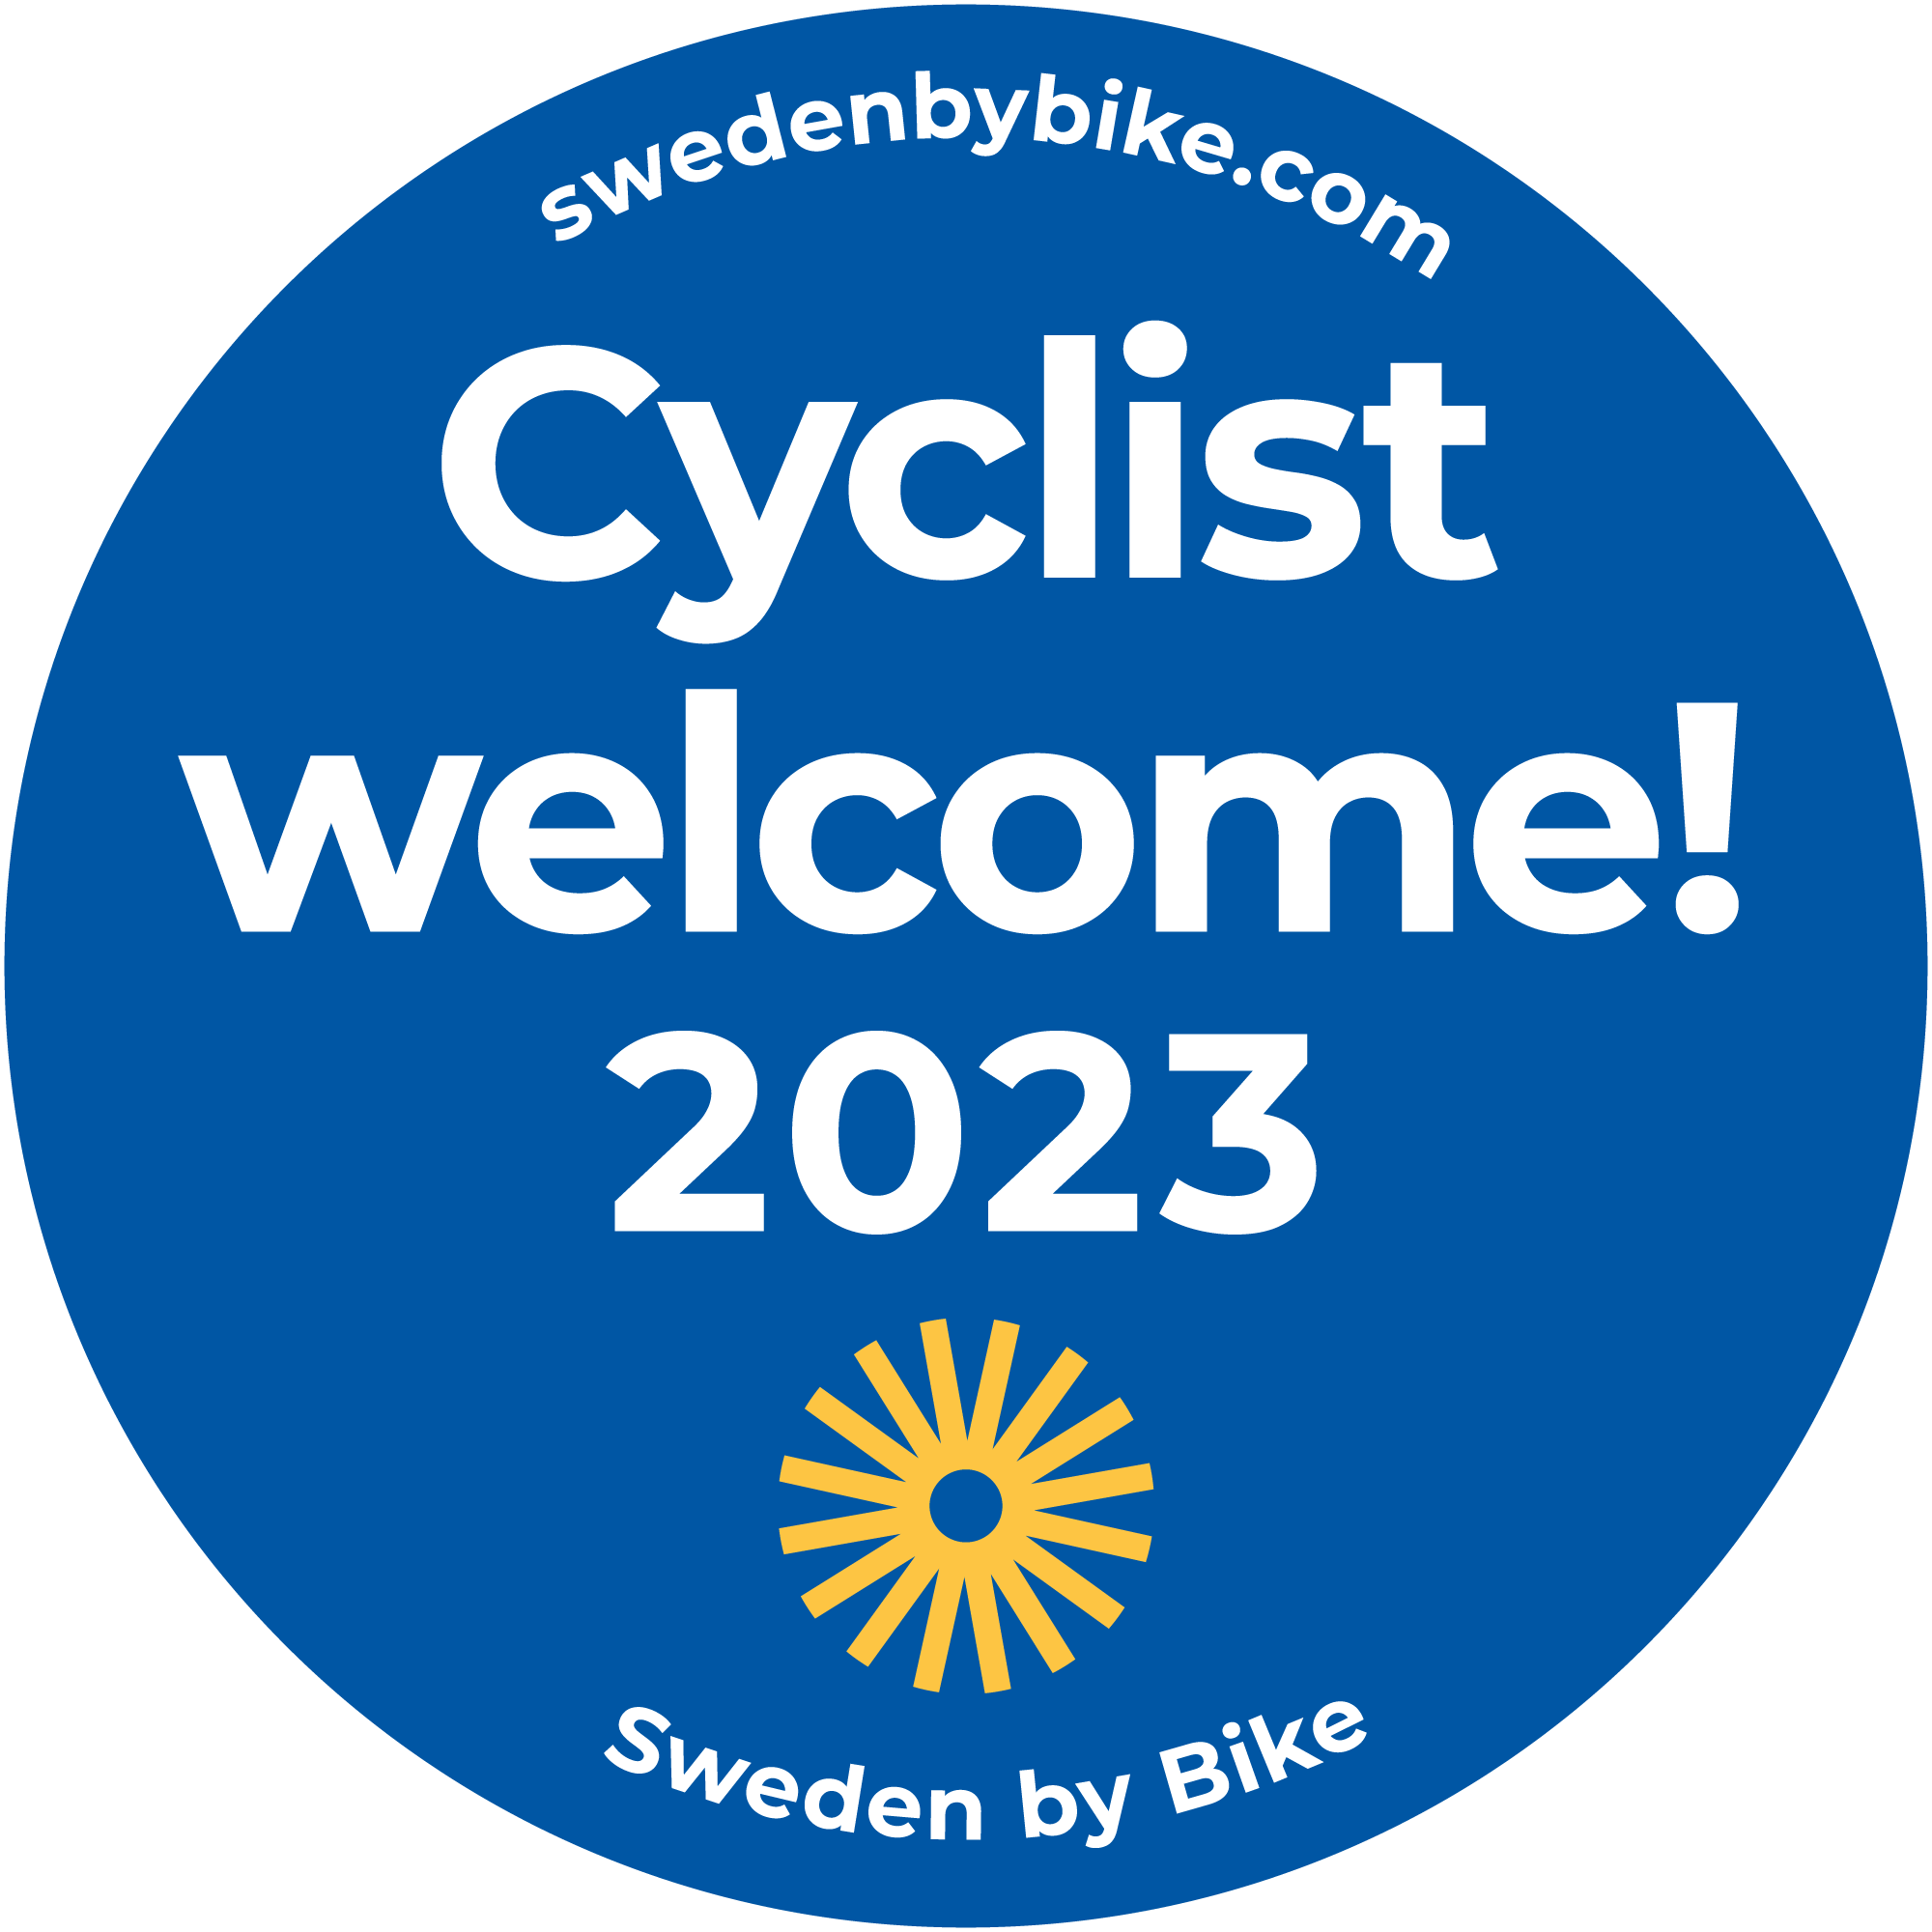 Cyclist Welcome 2023 - Sweden by Bike